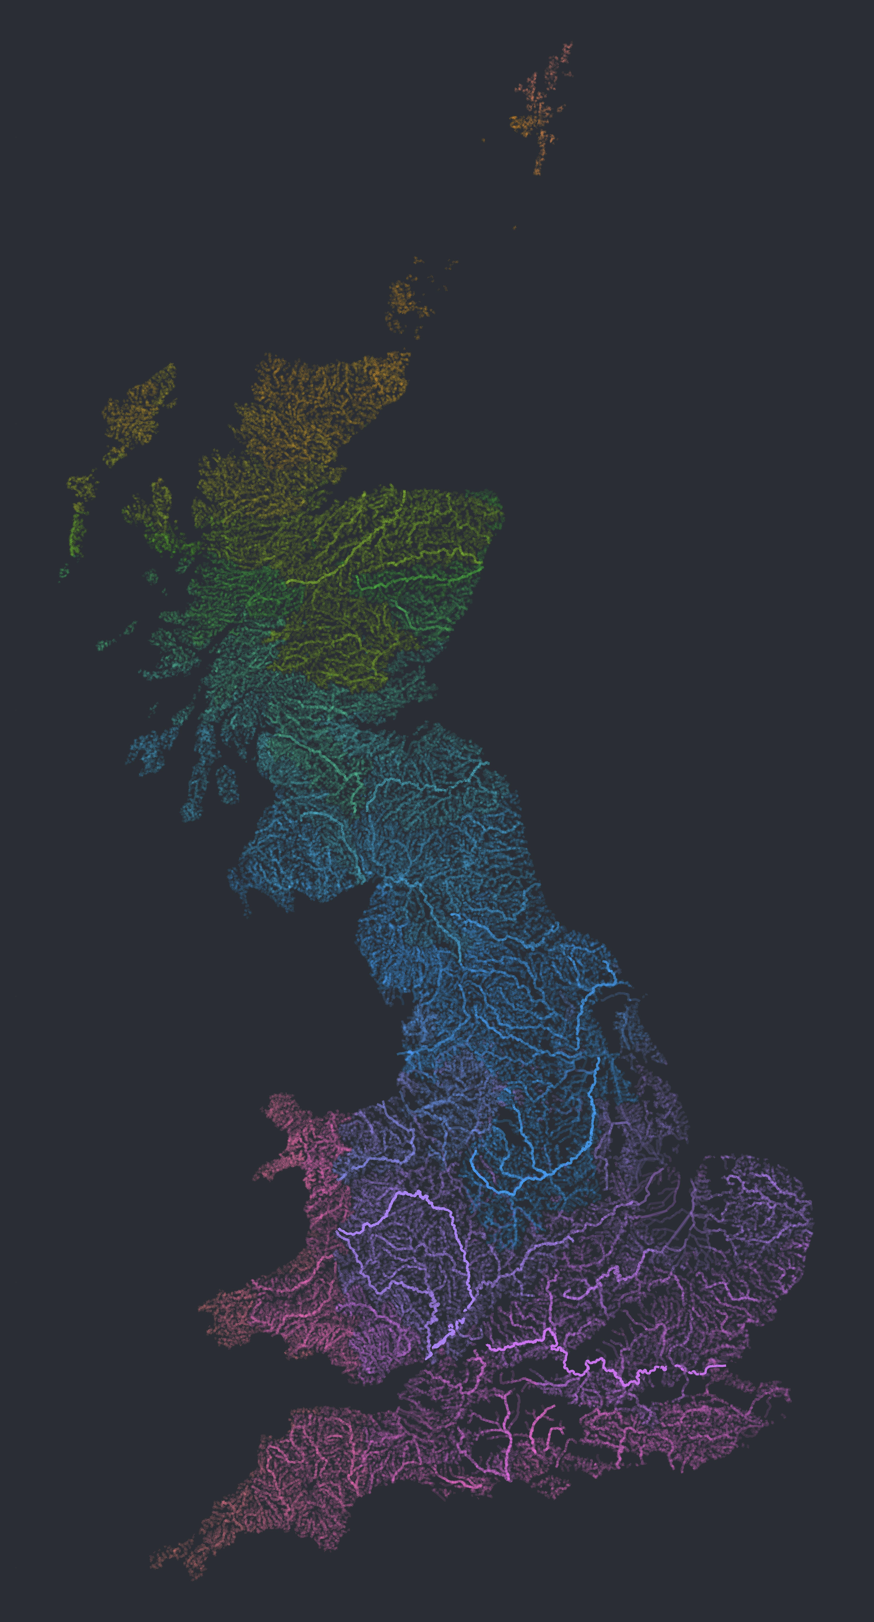 A map showing UK rivers.  They have been grouped by river system, each system has been coloured differently.  Long rivers are more pronounced that short ones.